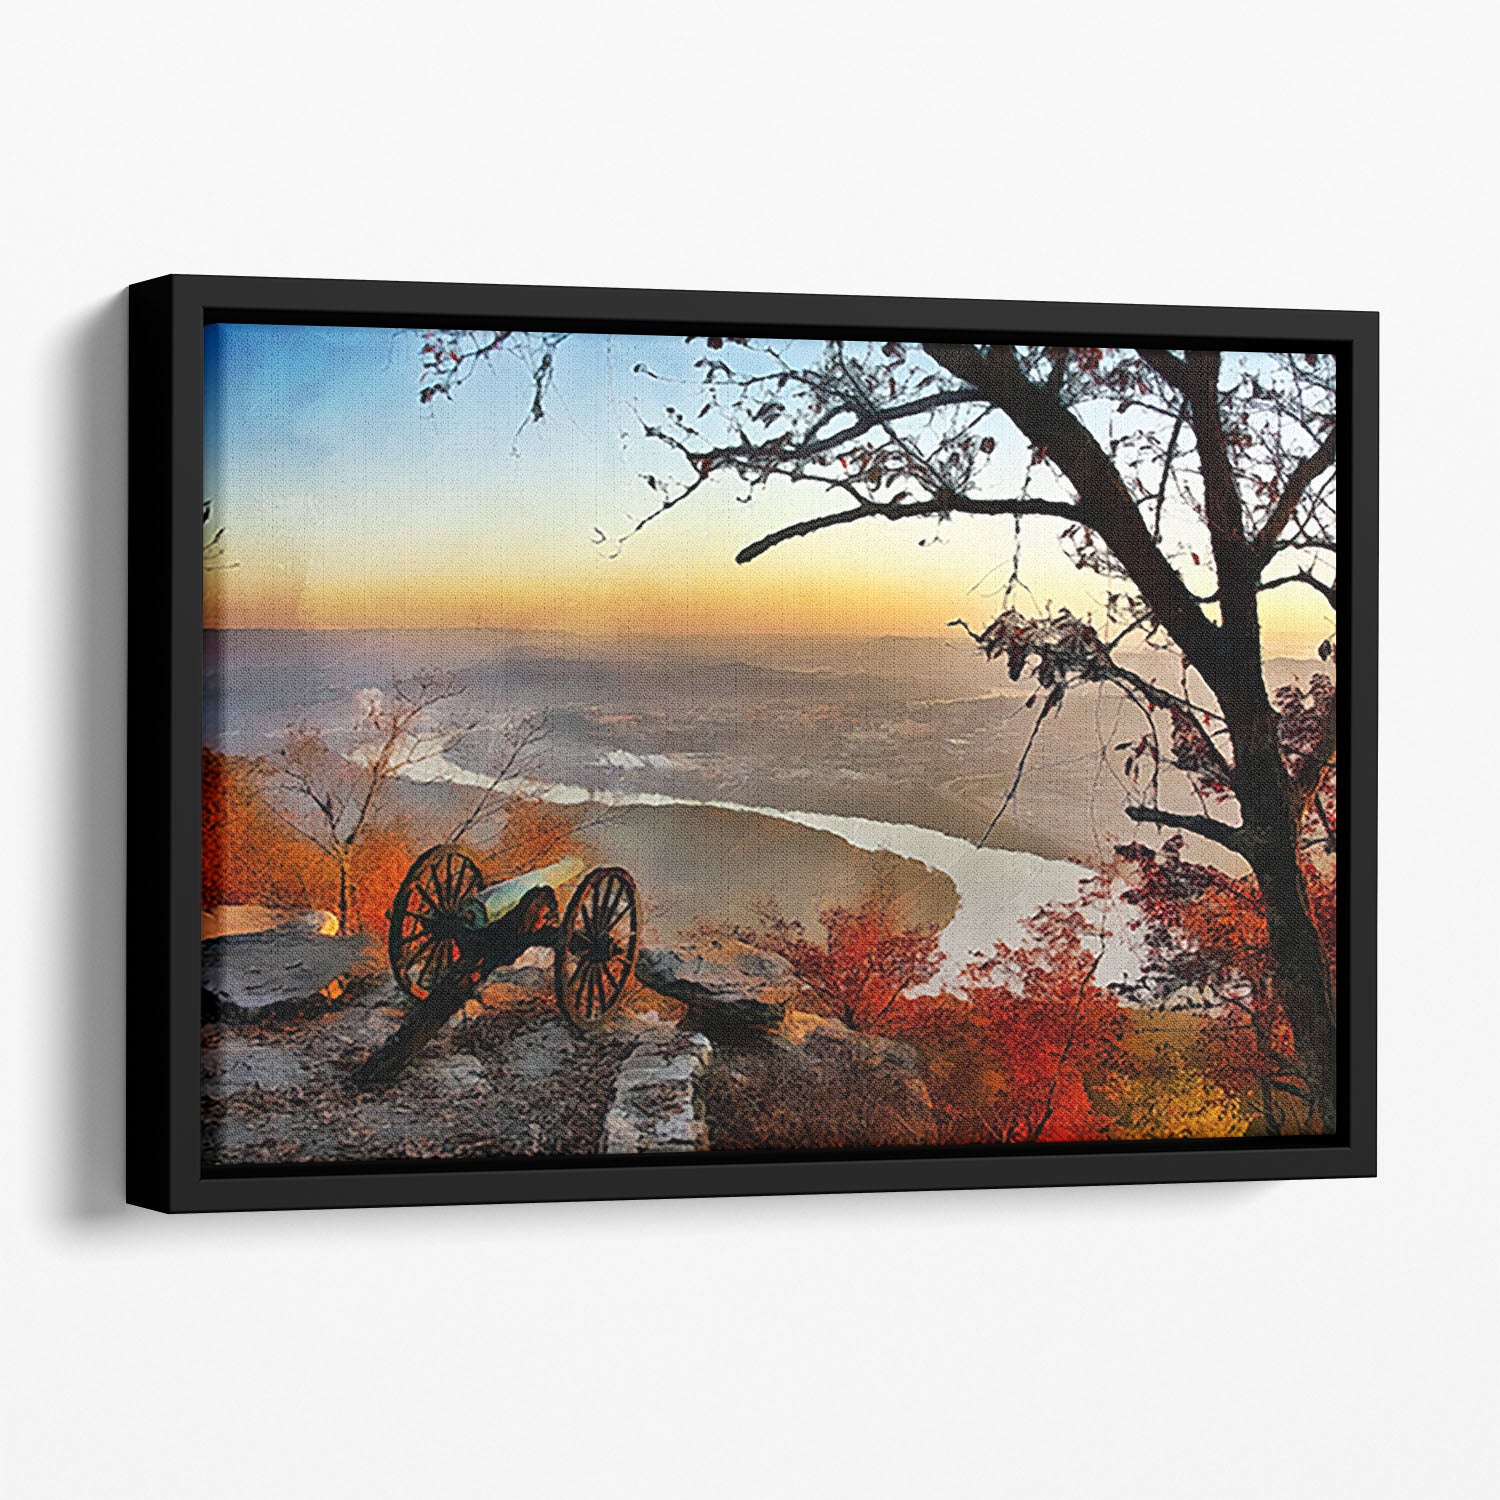 Chattanooga Campaign Painting Floating Framed Canvas